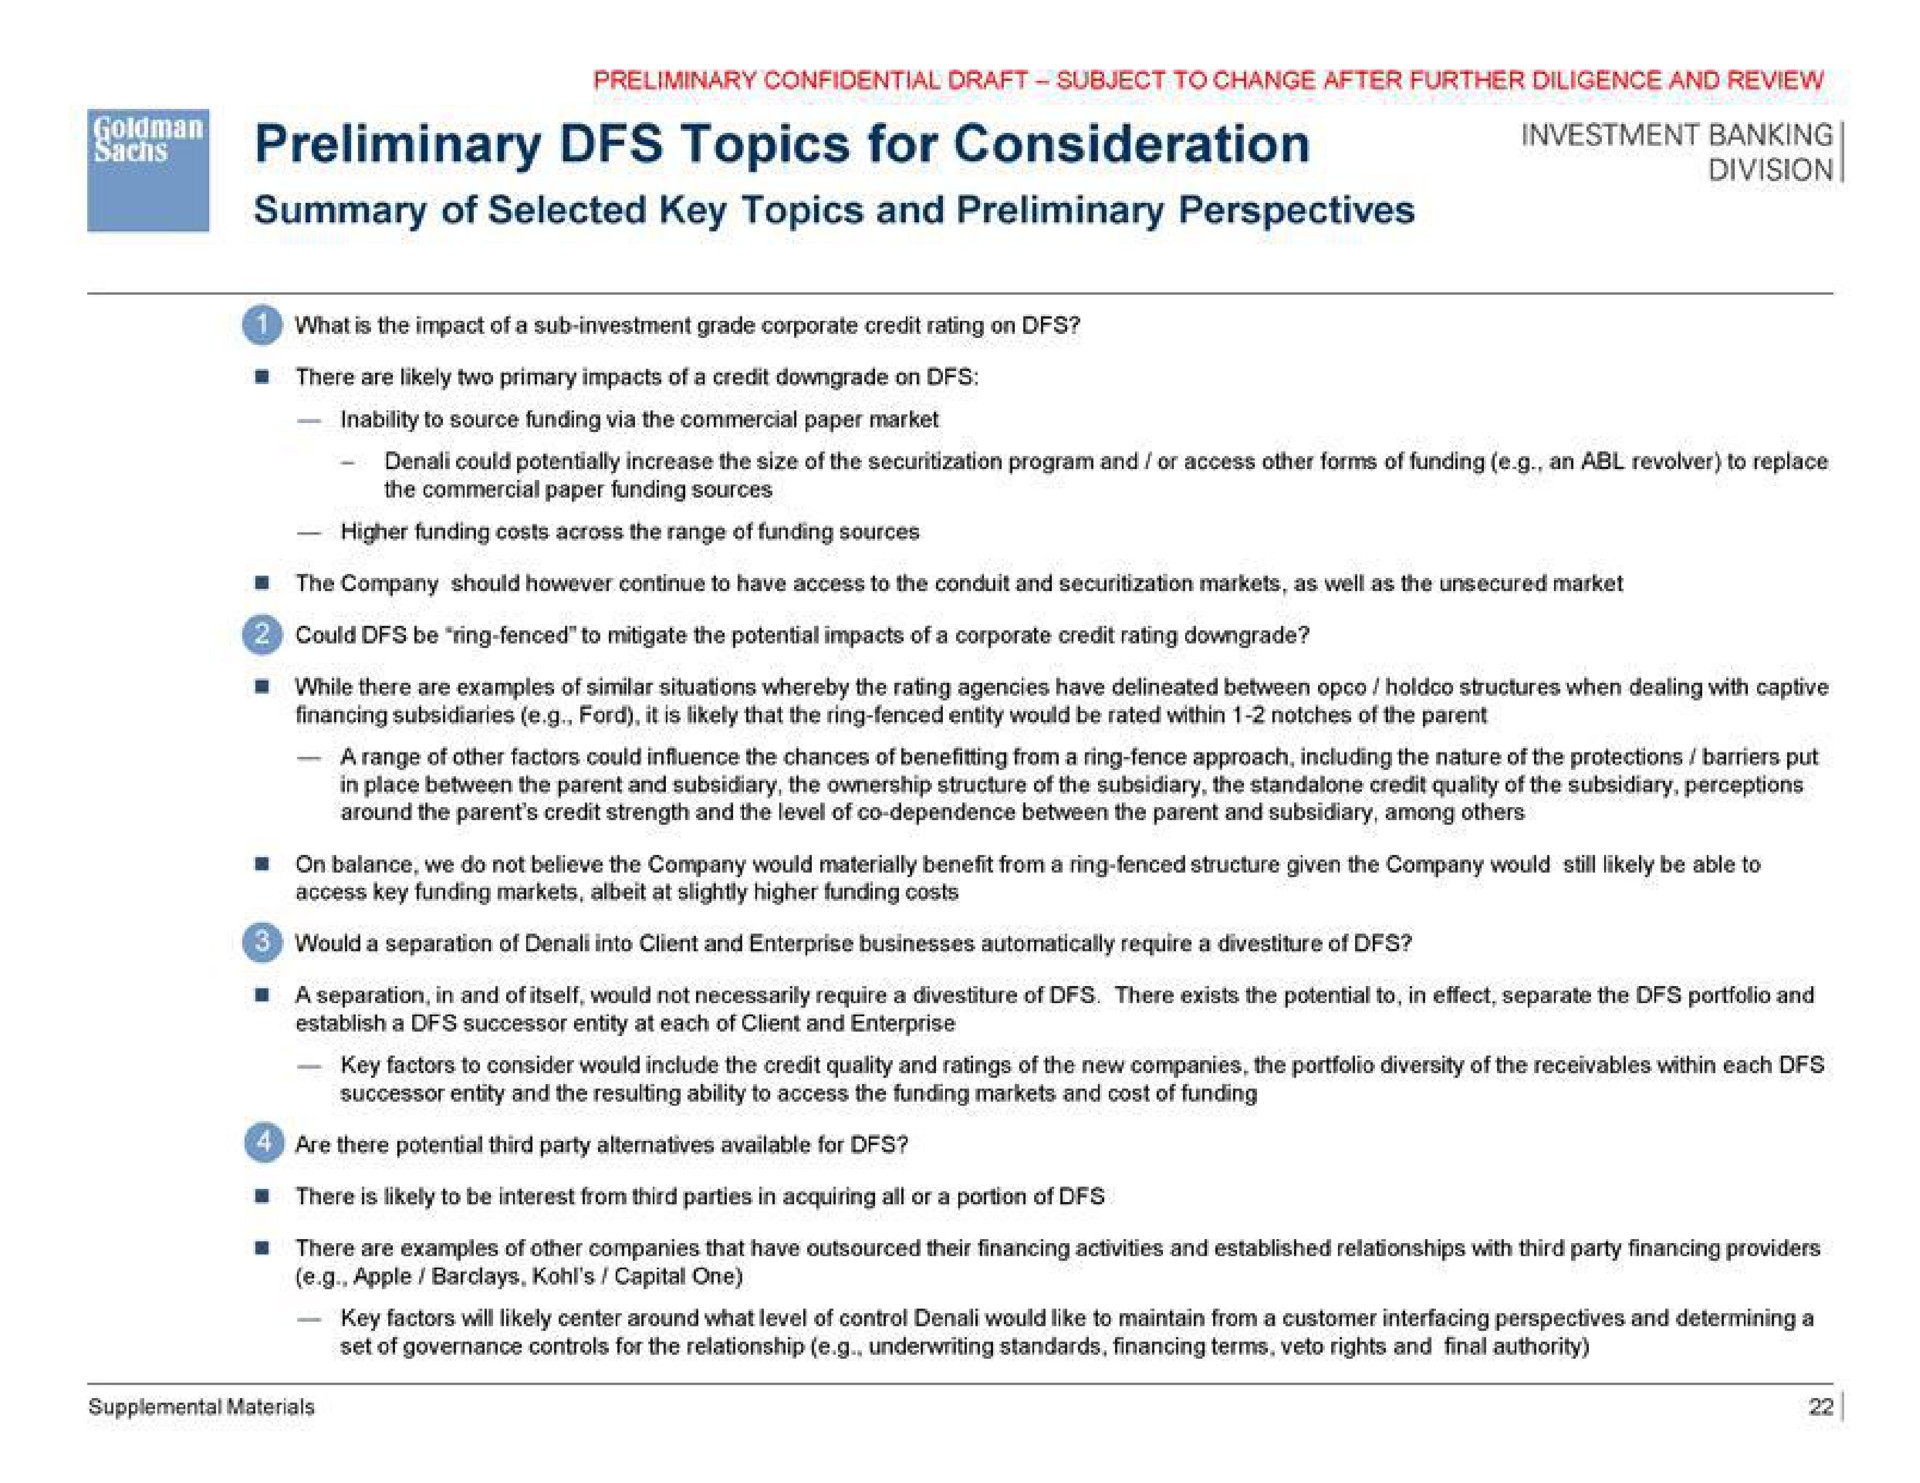 foot preliminary topics for consideration summary of selected key topics and preliminary perspectives investment banking | Goldman Sachs